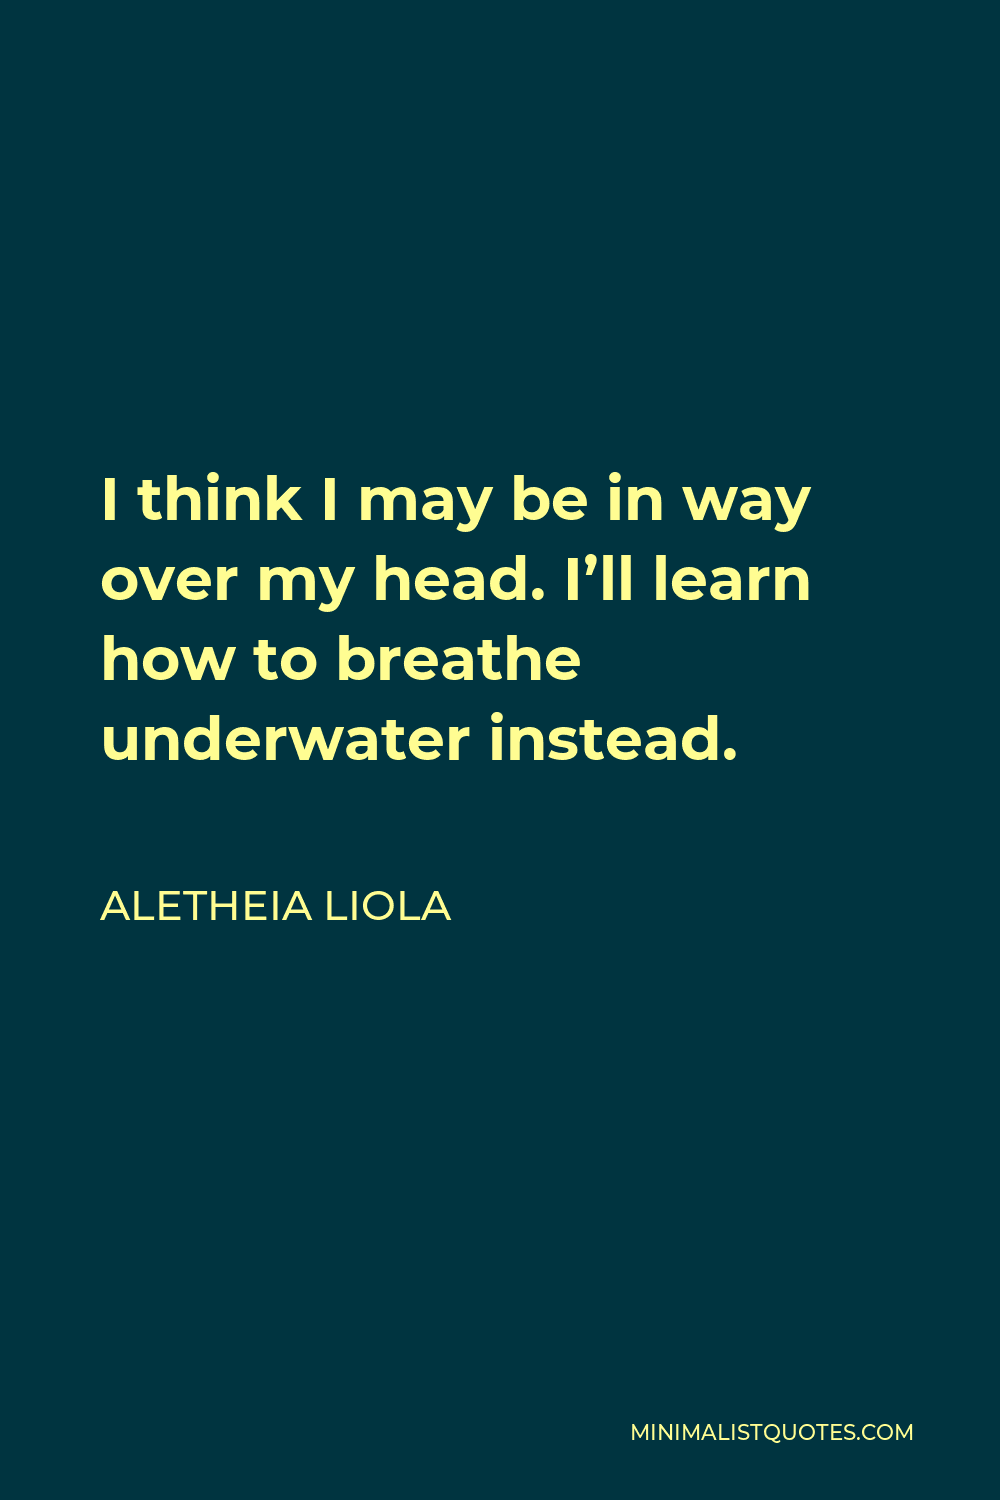 Aletheia Liola Quote - I think I may be in way over my head. I’ll learn how to breathe underwater instead.